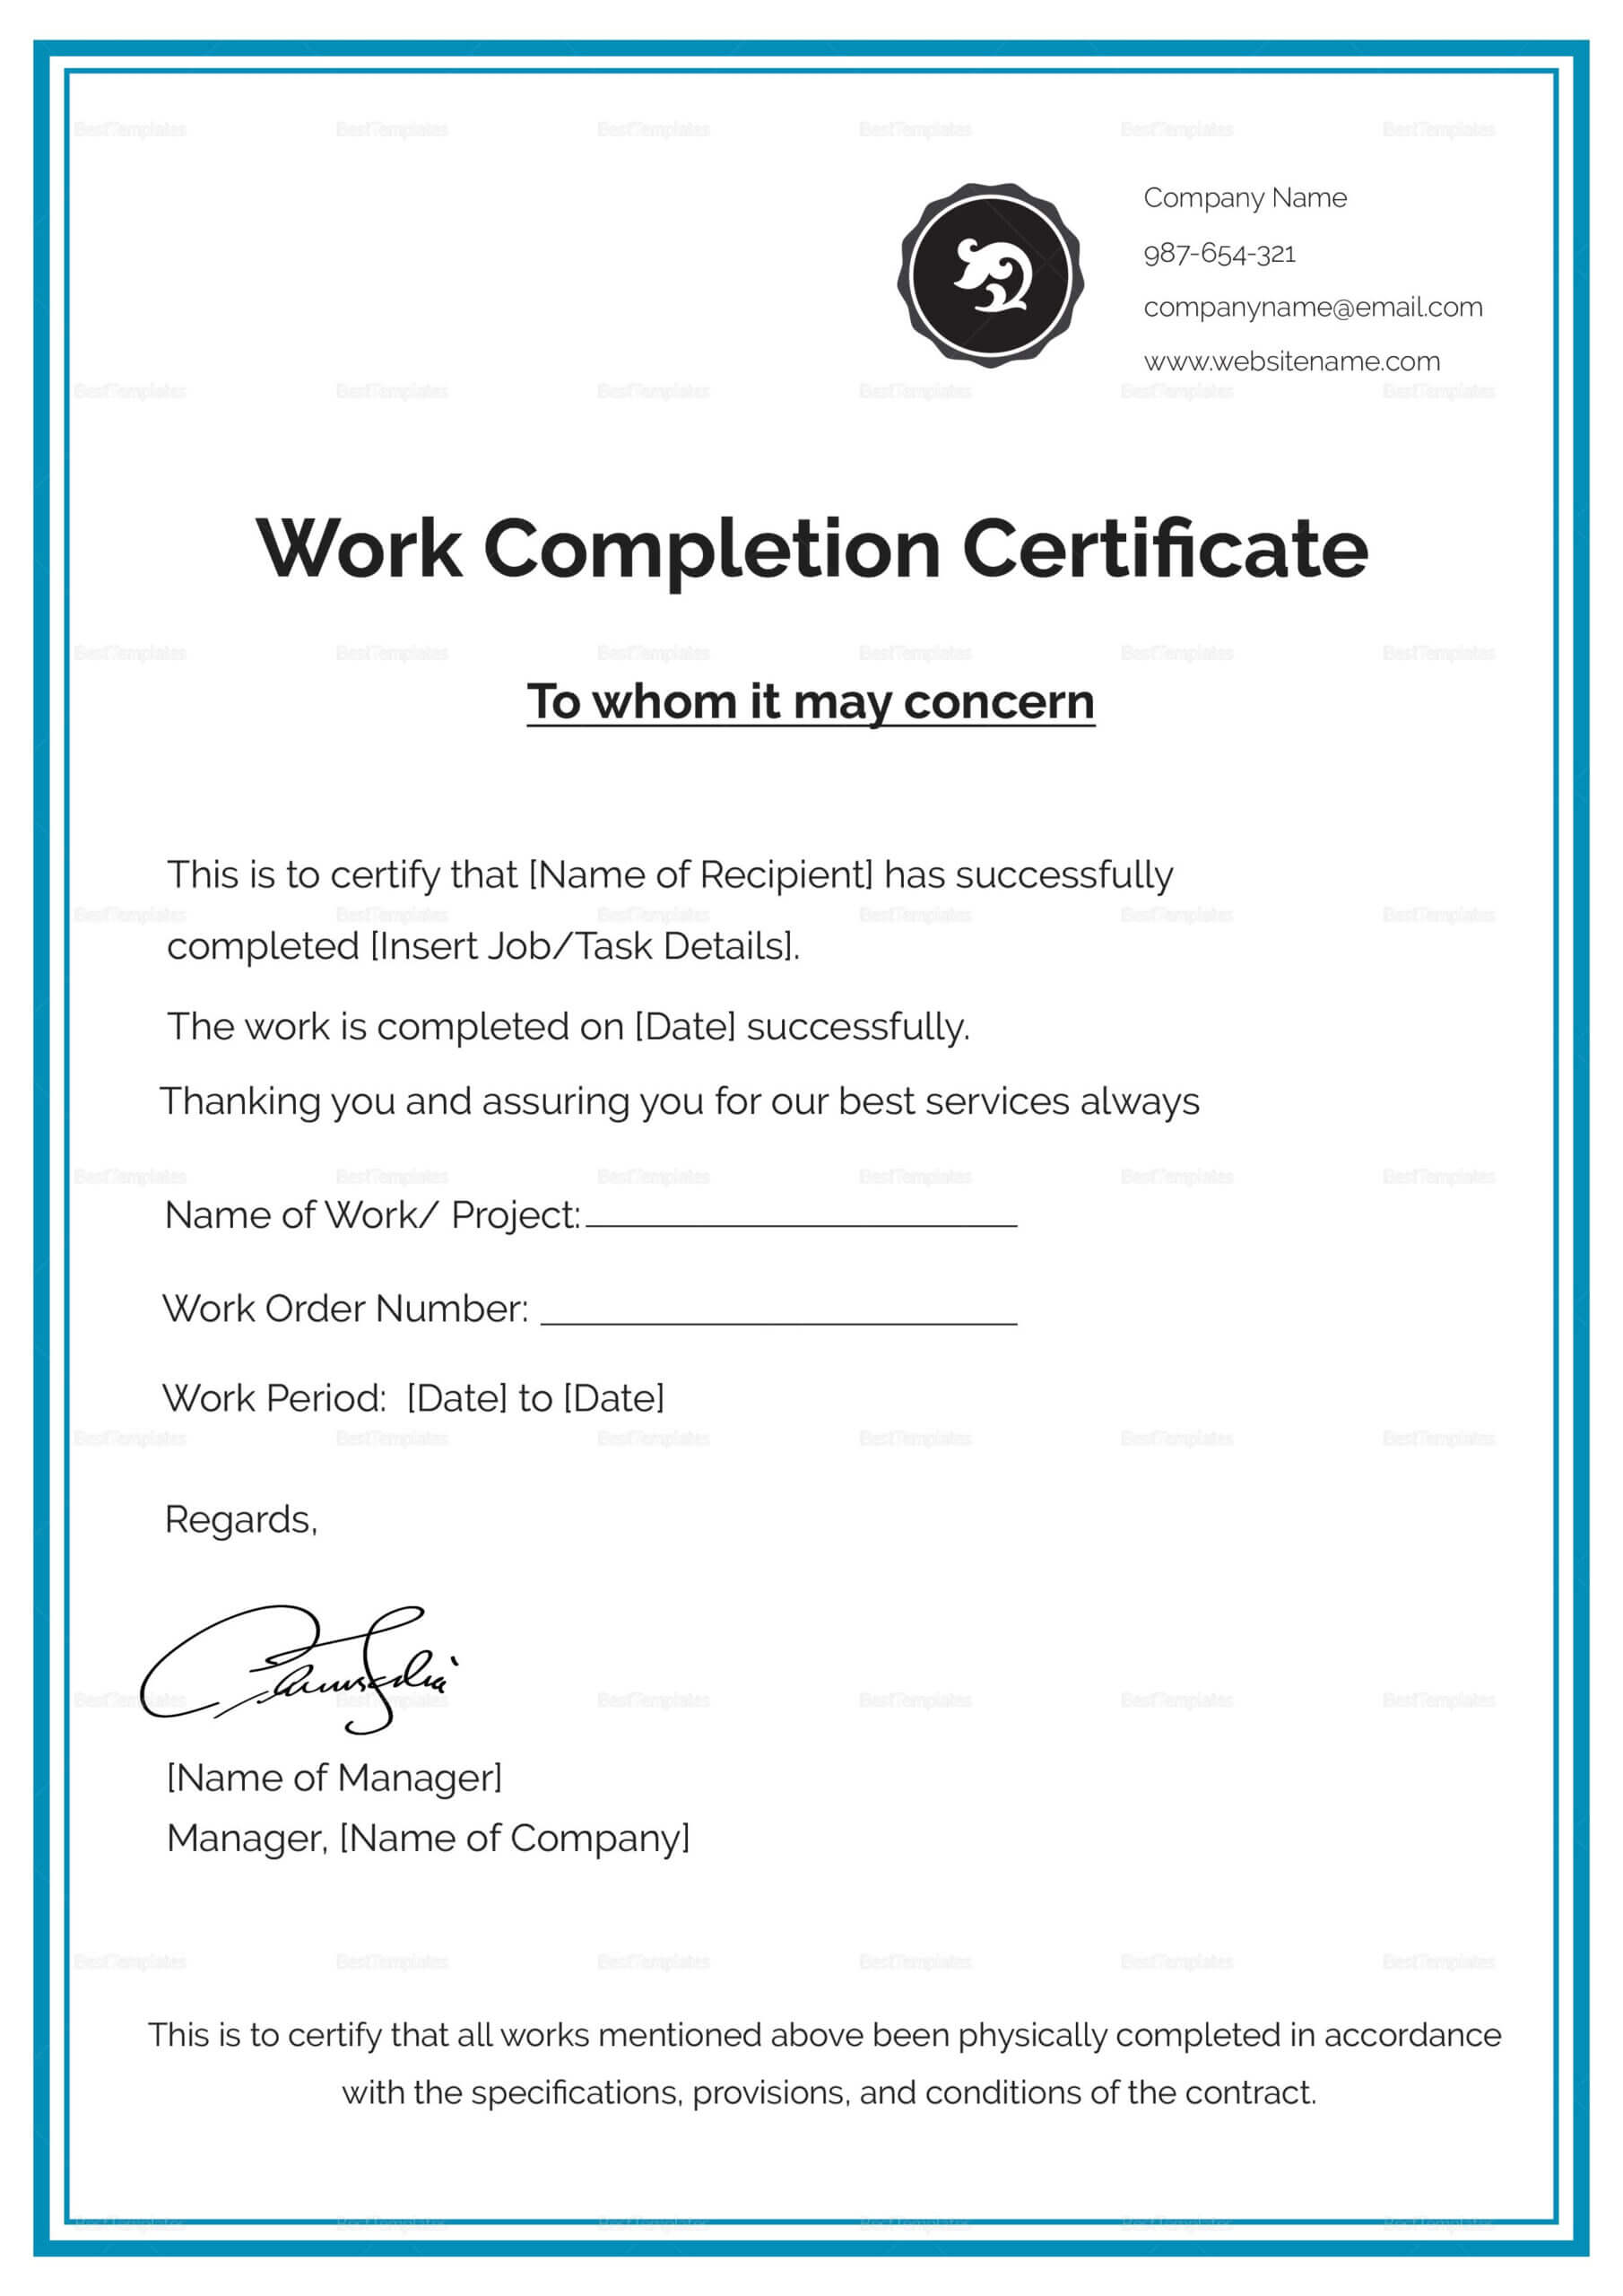 Work Completion Certificate Template In 2020 | Certificate Pertaining To Construction Certificate Of Completion Template